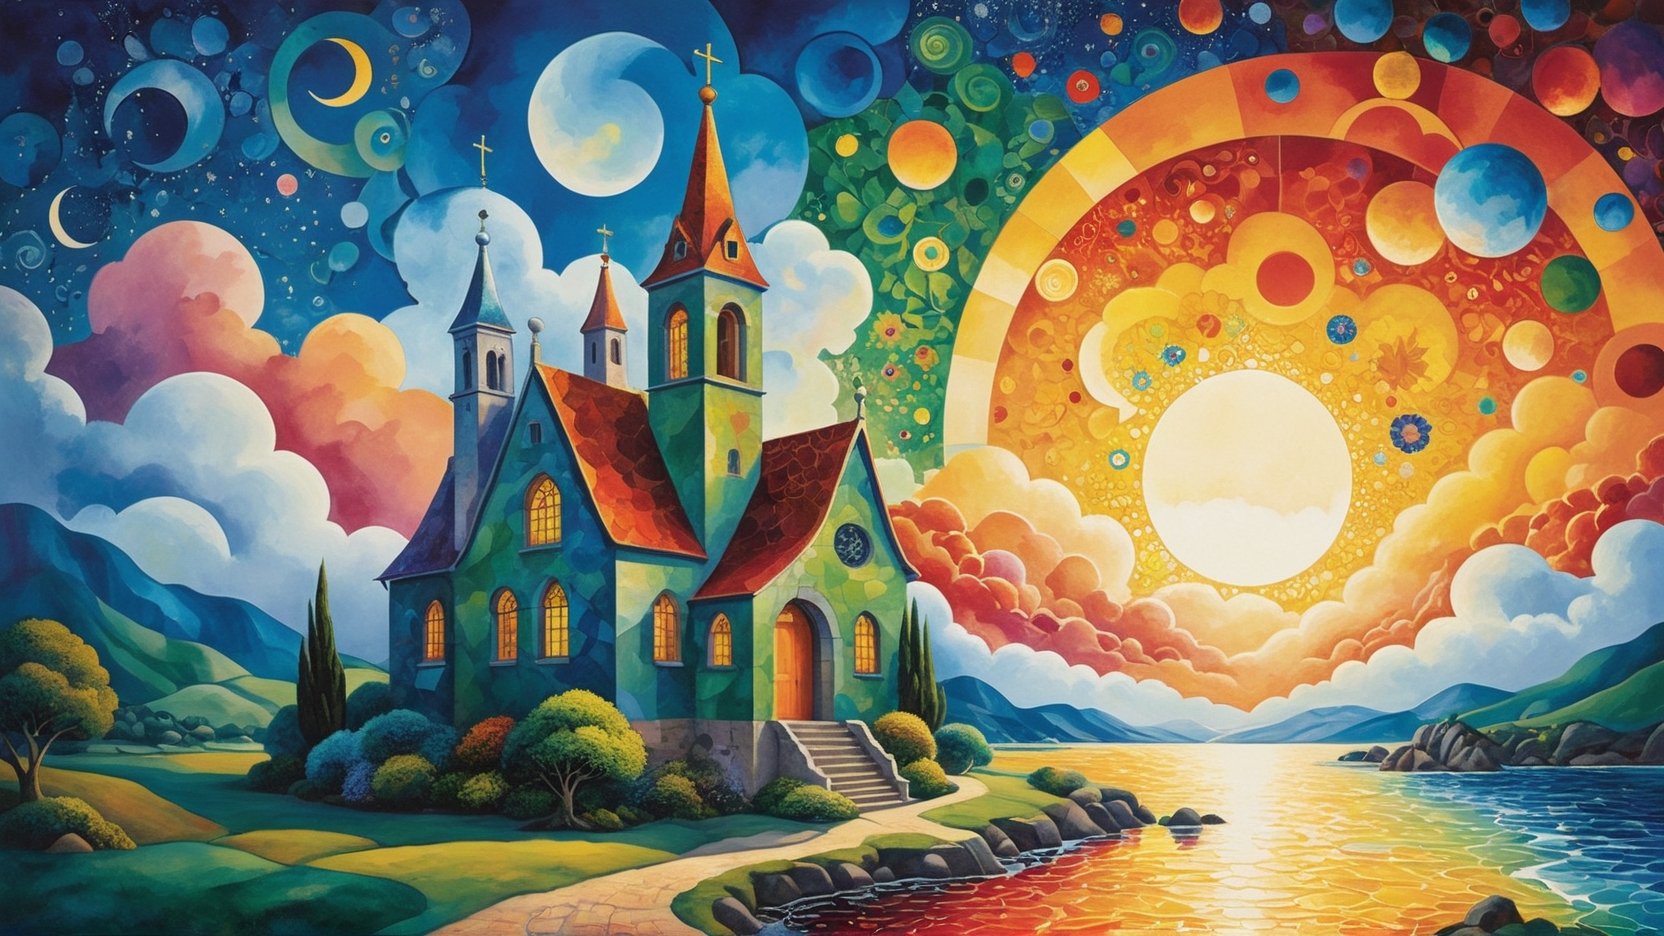 oil painting concept art, vibrant color, 

The Southern Star Atlas, (Teppei Sasakura style:1.5),  (Pointillism:1.3), (papercutting:1.2), cutout picture, (HDR:1.4), high contrast, stained glass,

sunset, clouds with angel halo, a vibrant colorful stained glass clouds is flying in the sunset sky, Create a whimsical and vibrant flower garden townscape with colorful, fantastical buildings, strange buildings, shore of a vibrant cluttered town, The color palette include vibrant warm colors with contrasting highlights and shadows to give depth, The brushwork is rough with clean lines for the buildings and more fluid strokes for the sky and water reflections, The overall art style evoke elements of surrealism mixed with folk art, Draw inspiration from artists like Marc Chagall for dreamlike scenes and Joan Miró for bold colors and shapes,

a image for a póster of psytrance festival, contains fractals, spiritual composition, the imagen evoke happiness and energy. the imagen contains organic textures and surreal composition. some parts of the image evoke a las trip,